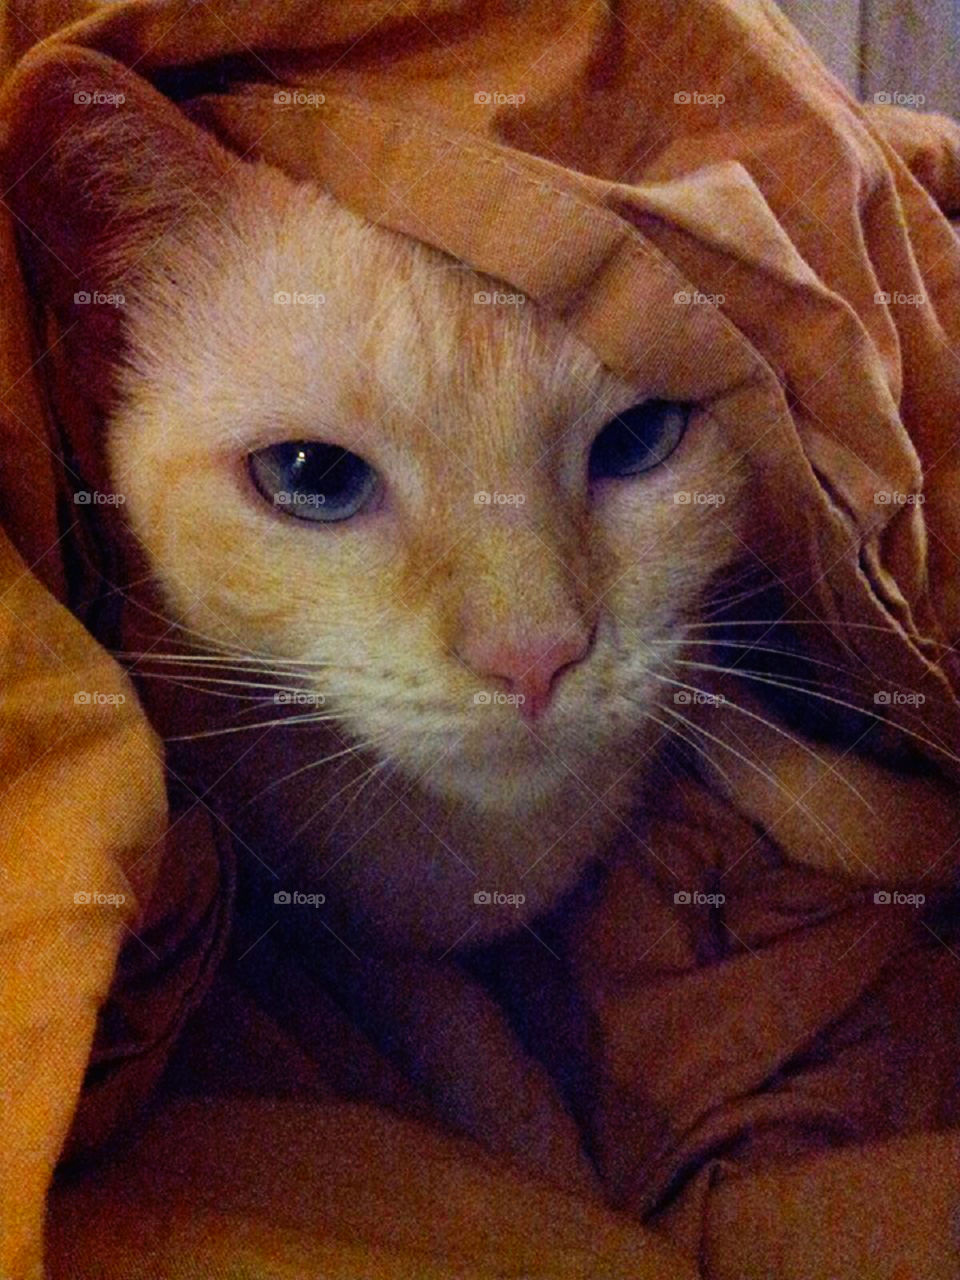 Cat in a blanket. My cat sandy loves to sleep under the sheet